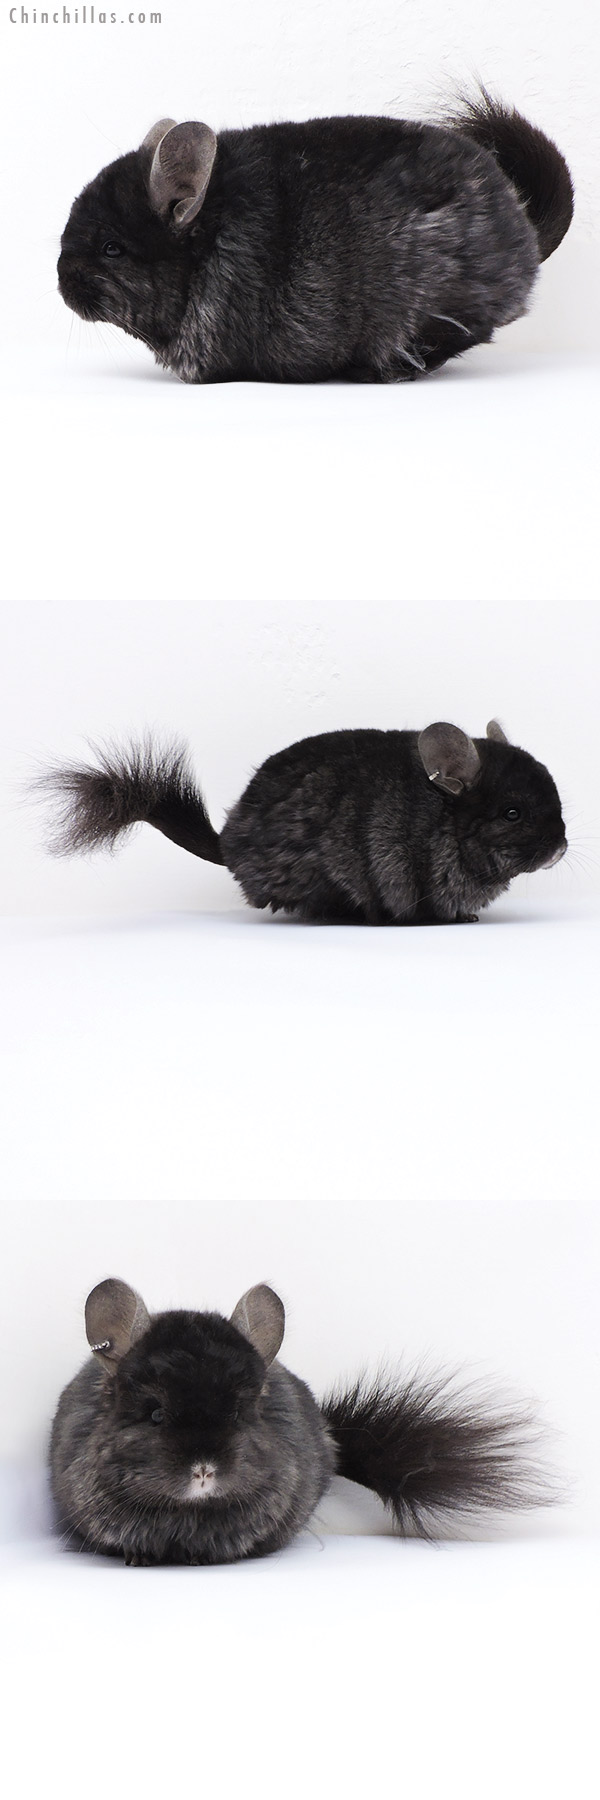 Chinchilla or related item offered for sale or export on Chinchillas.com - 18053 Ebony ( Locken Carrier )  Royal Persian Angora Male Chinchilla